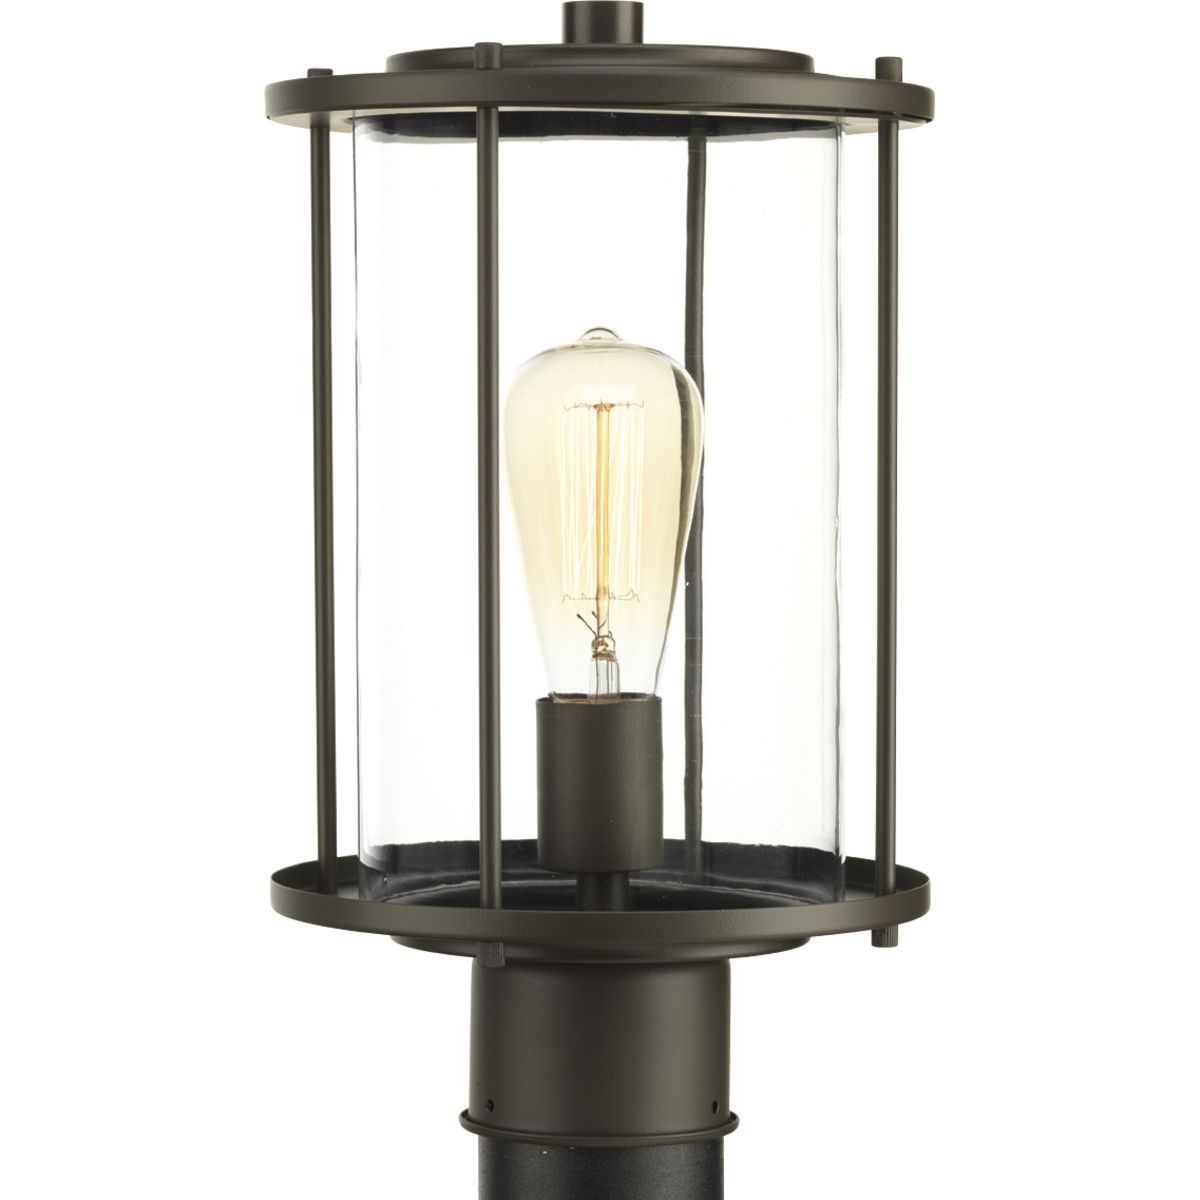 Gunther lanterns provide an affordable and stylish option to update a home's curb appeal. Inspired by the popular farmhouse design trend, these cylindrical lights provide the perfect showcase for vintage style light bulbs. The one-light post lantern features clear glass finished in Antique Bronze.